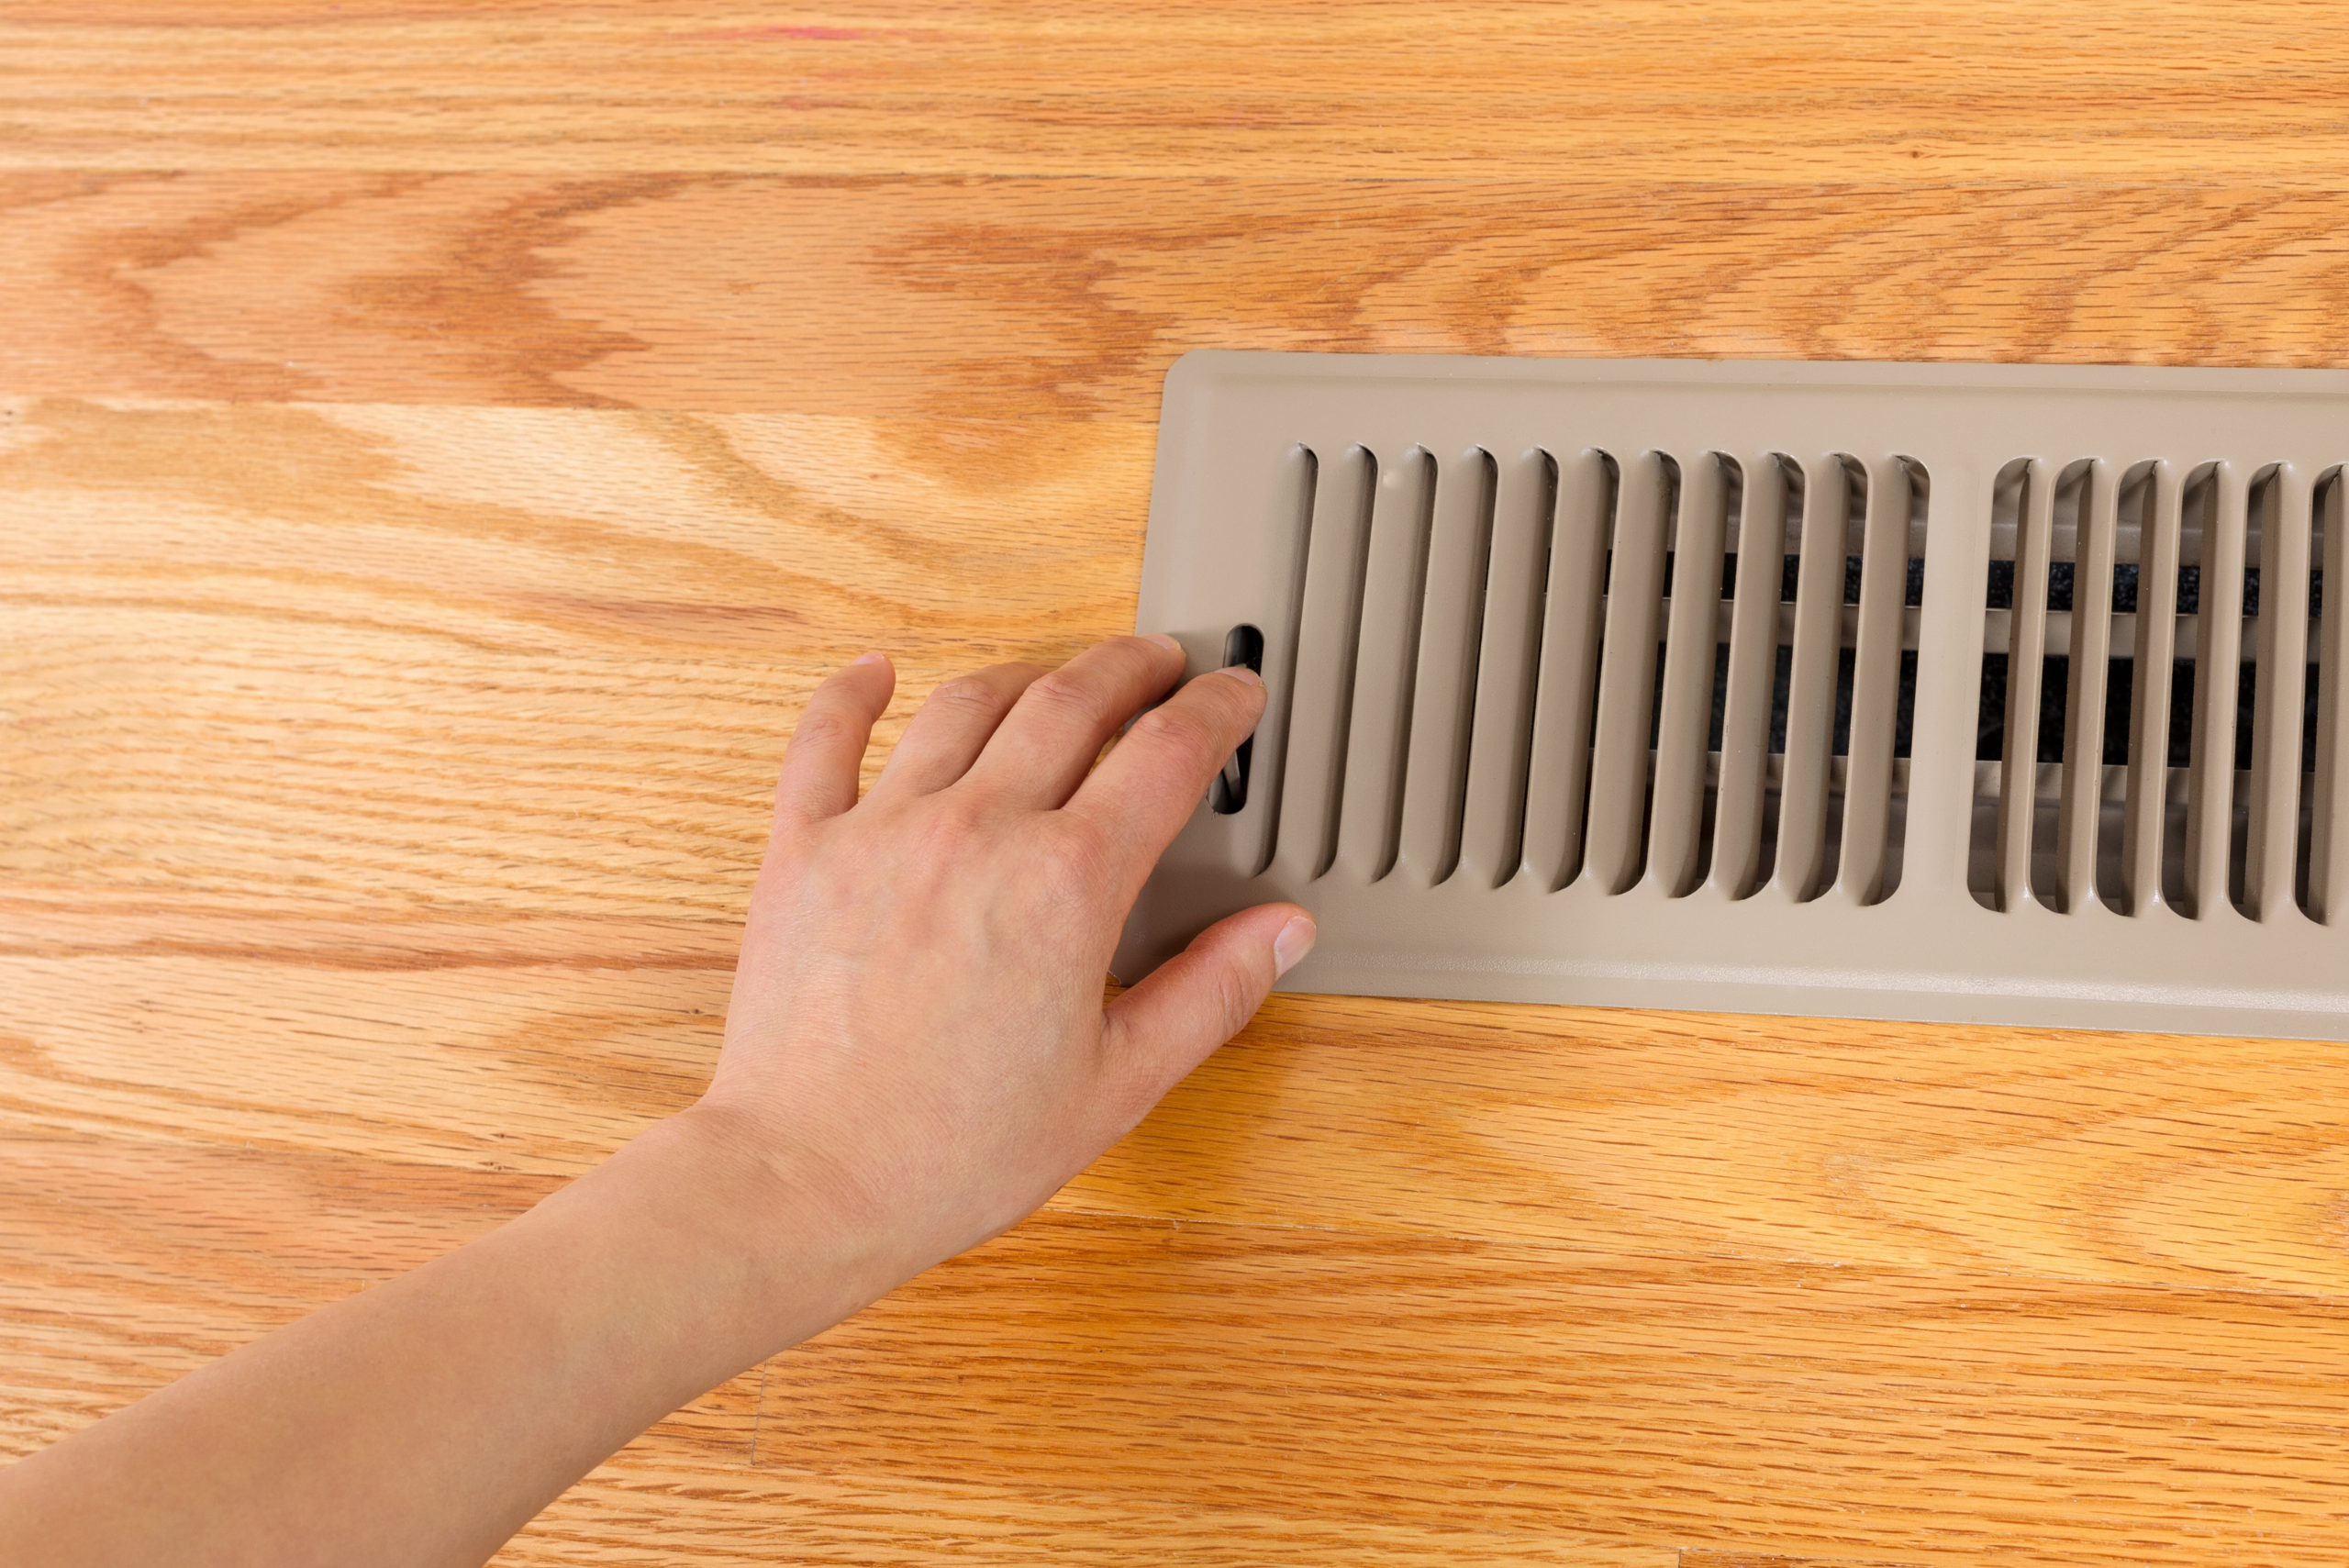 A hand reaching to close home vents.